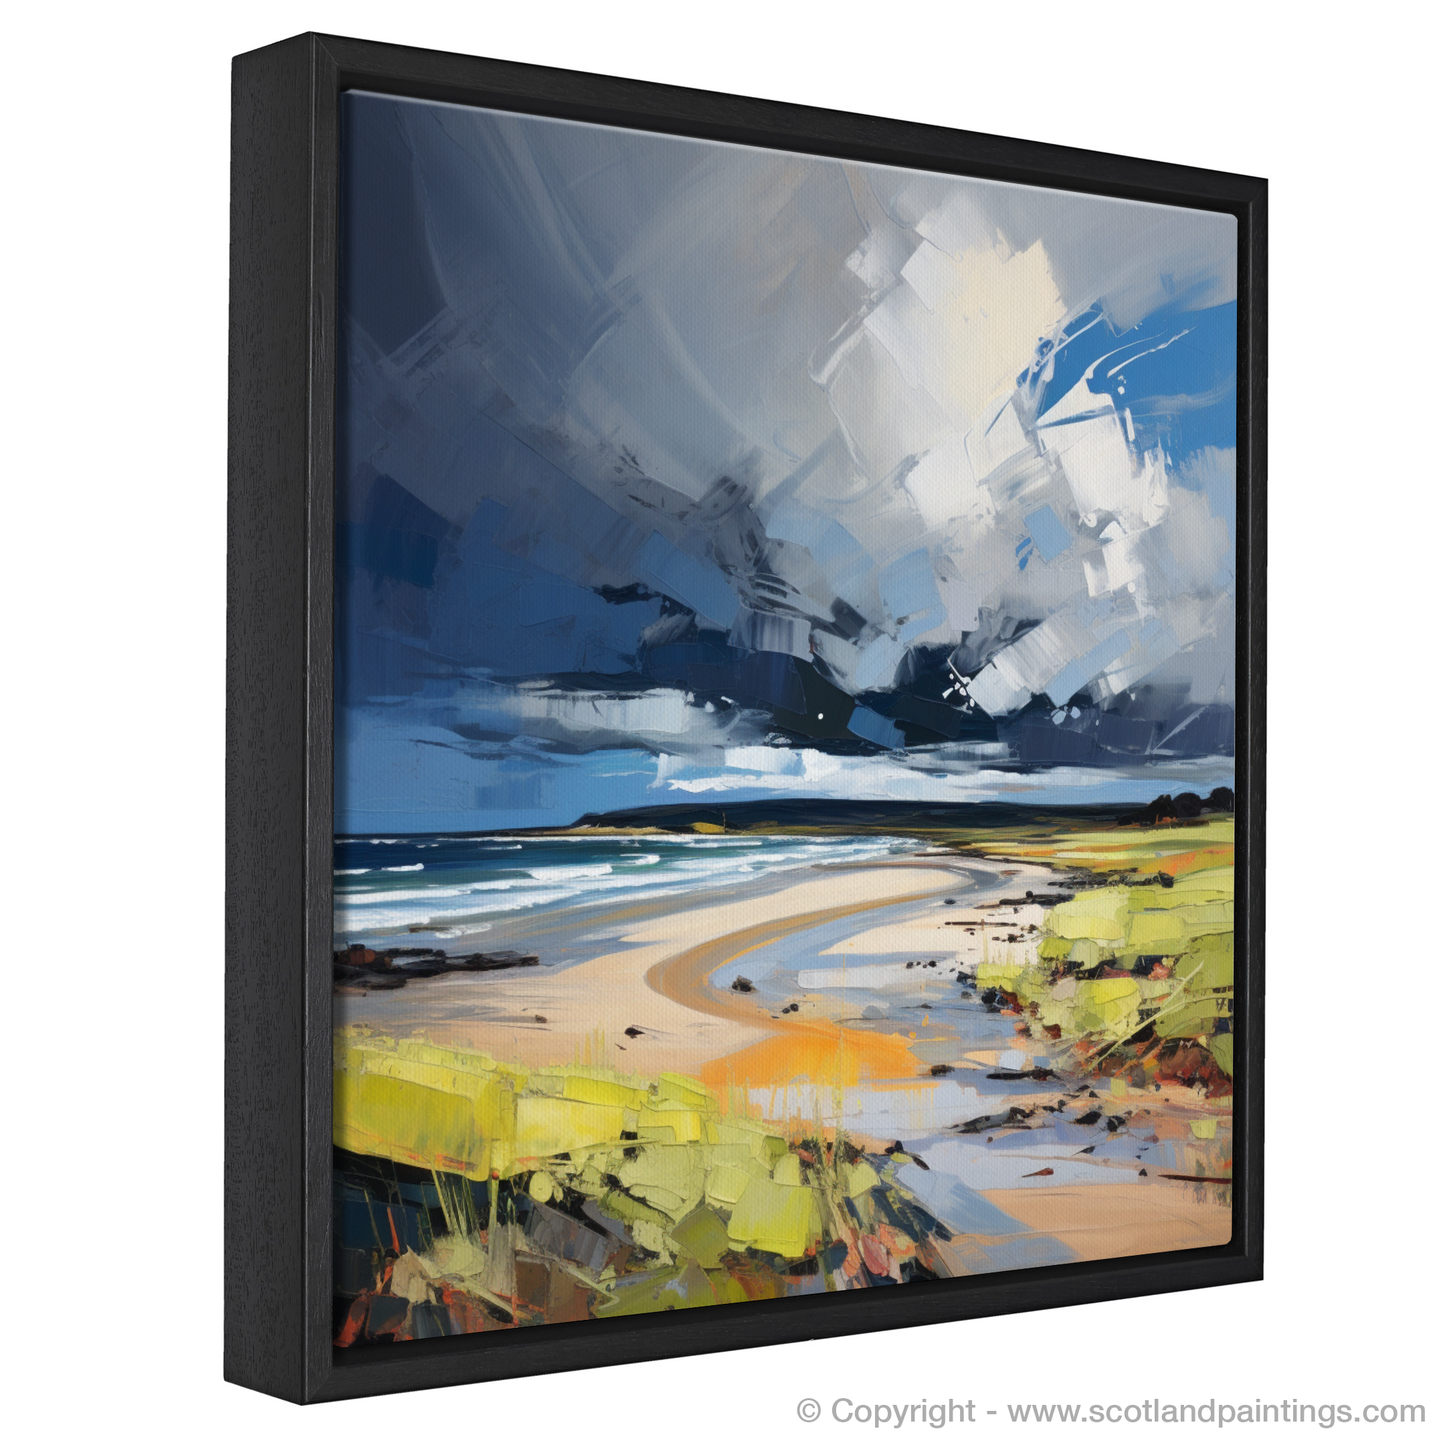 Painting and Art Print of Gullane Beach with a stormy sky entitled "Tempestuous Gullane: An Expressionist Ode to Scotland's Coastline".